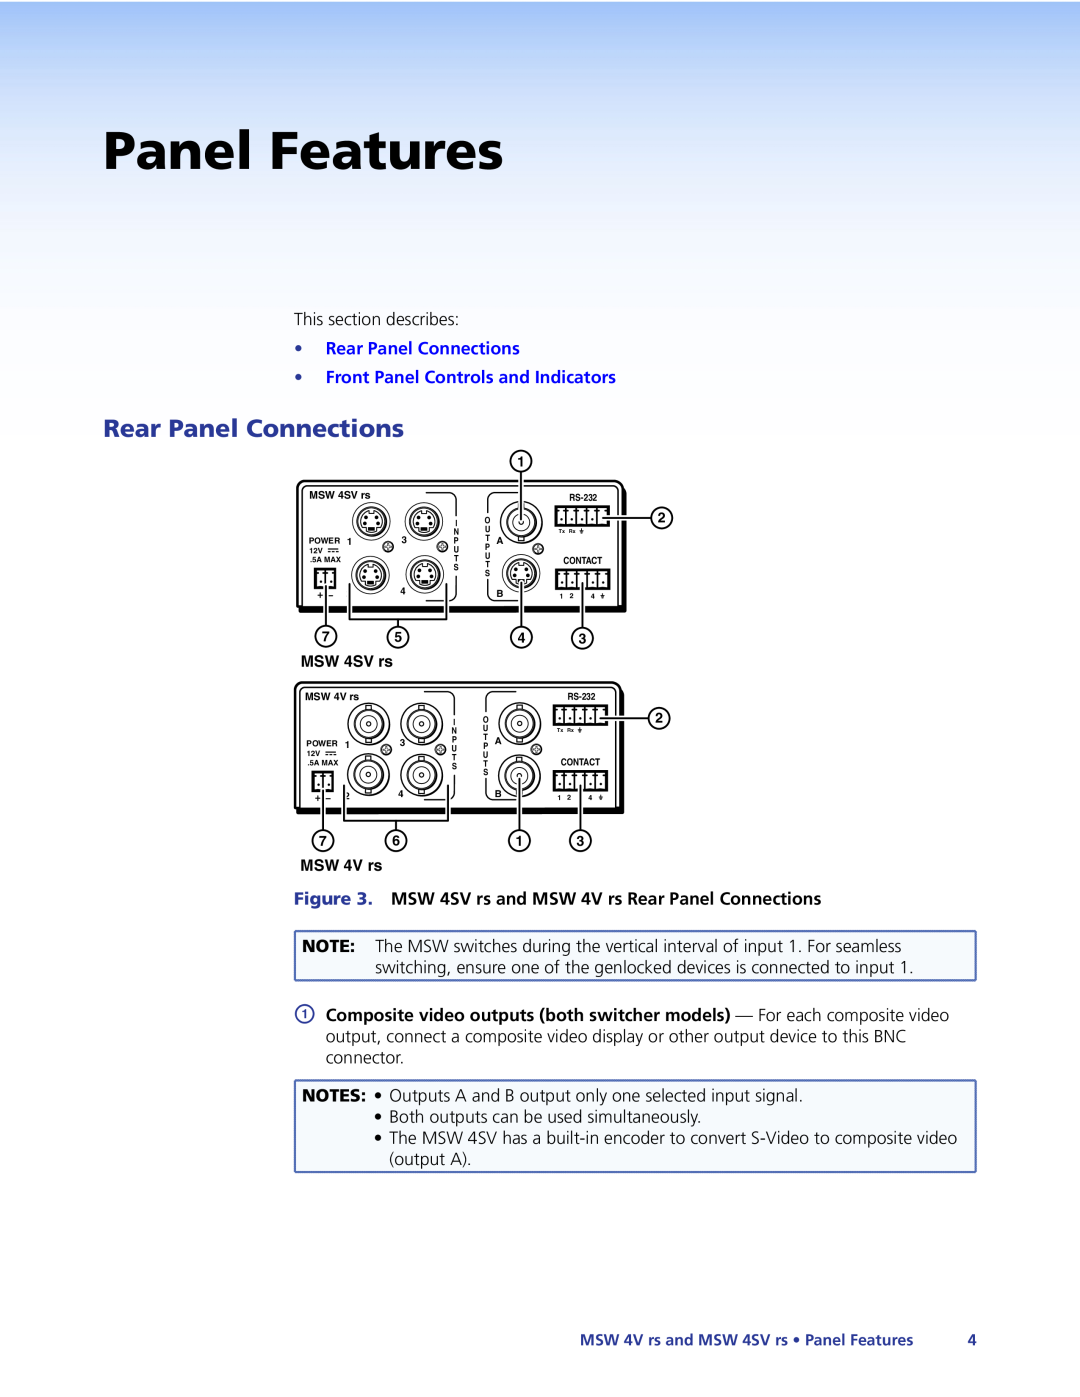 Extron electronic MSW 4SV RS manual Panel Features, MSW 4SV rs and MSW 4V rs Rear Panel Connections 